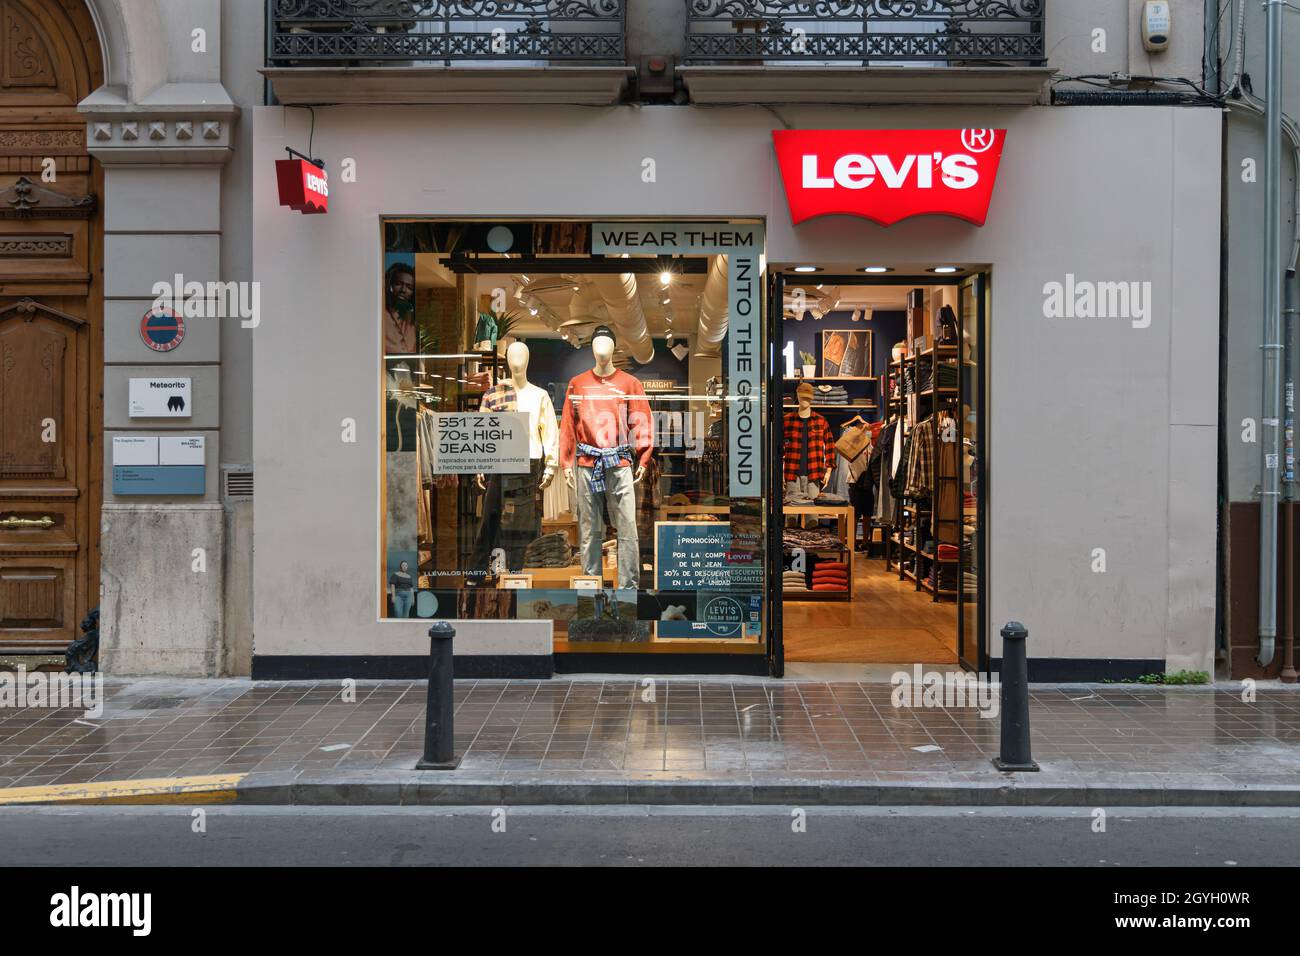 VALENCIA, SPAIN - SEPTEMBER 30, 2021: Levi Strauss & Co. is an American clothing company known worldwide for its Levi's brand of denim jeans Stock Photo